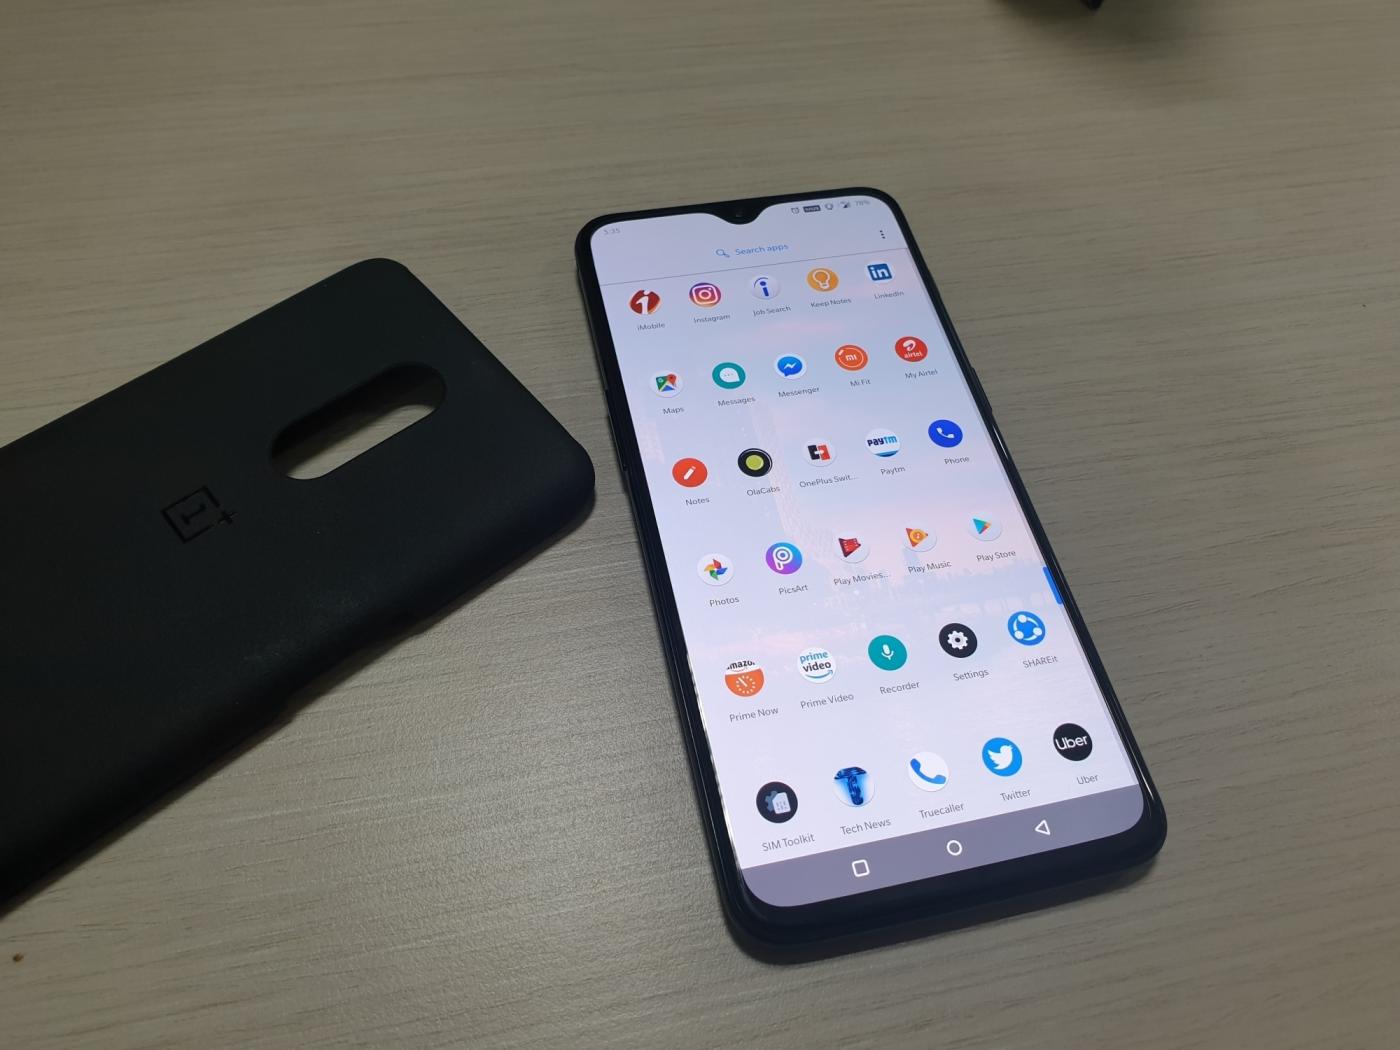 OnePlus marked its entry into the US with OnePlus 6T after partnering with mobile services operator T-Mobile in late October. It has now brought the device to India. (Credit: IANS) by .